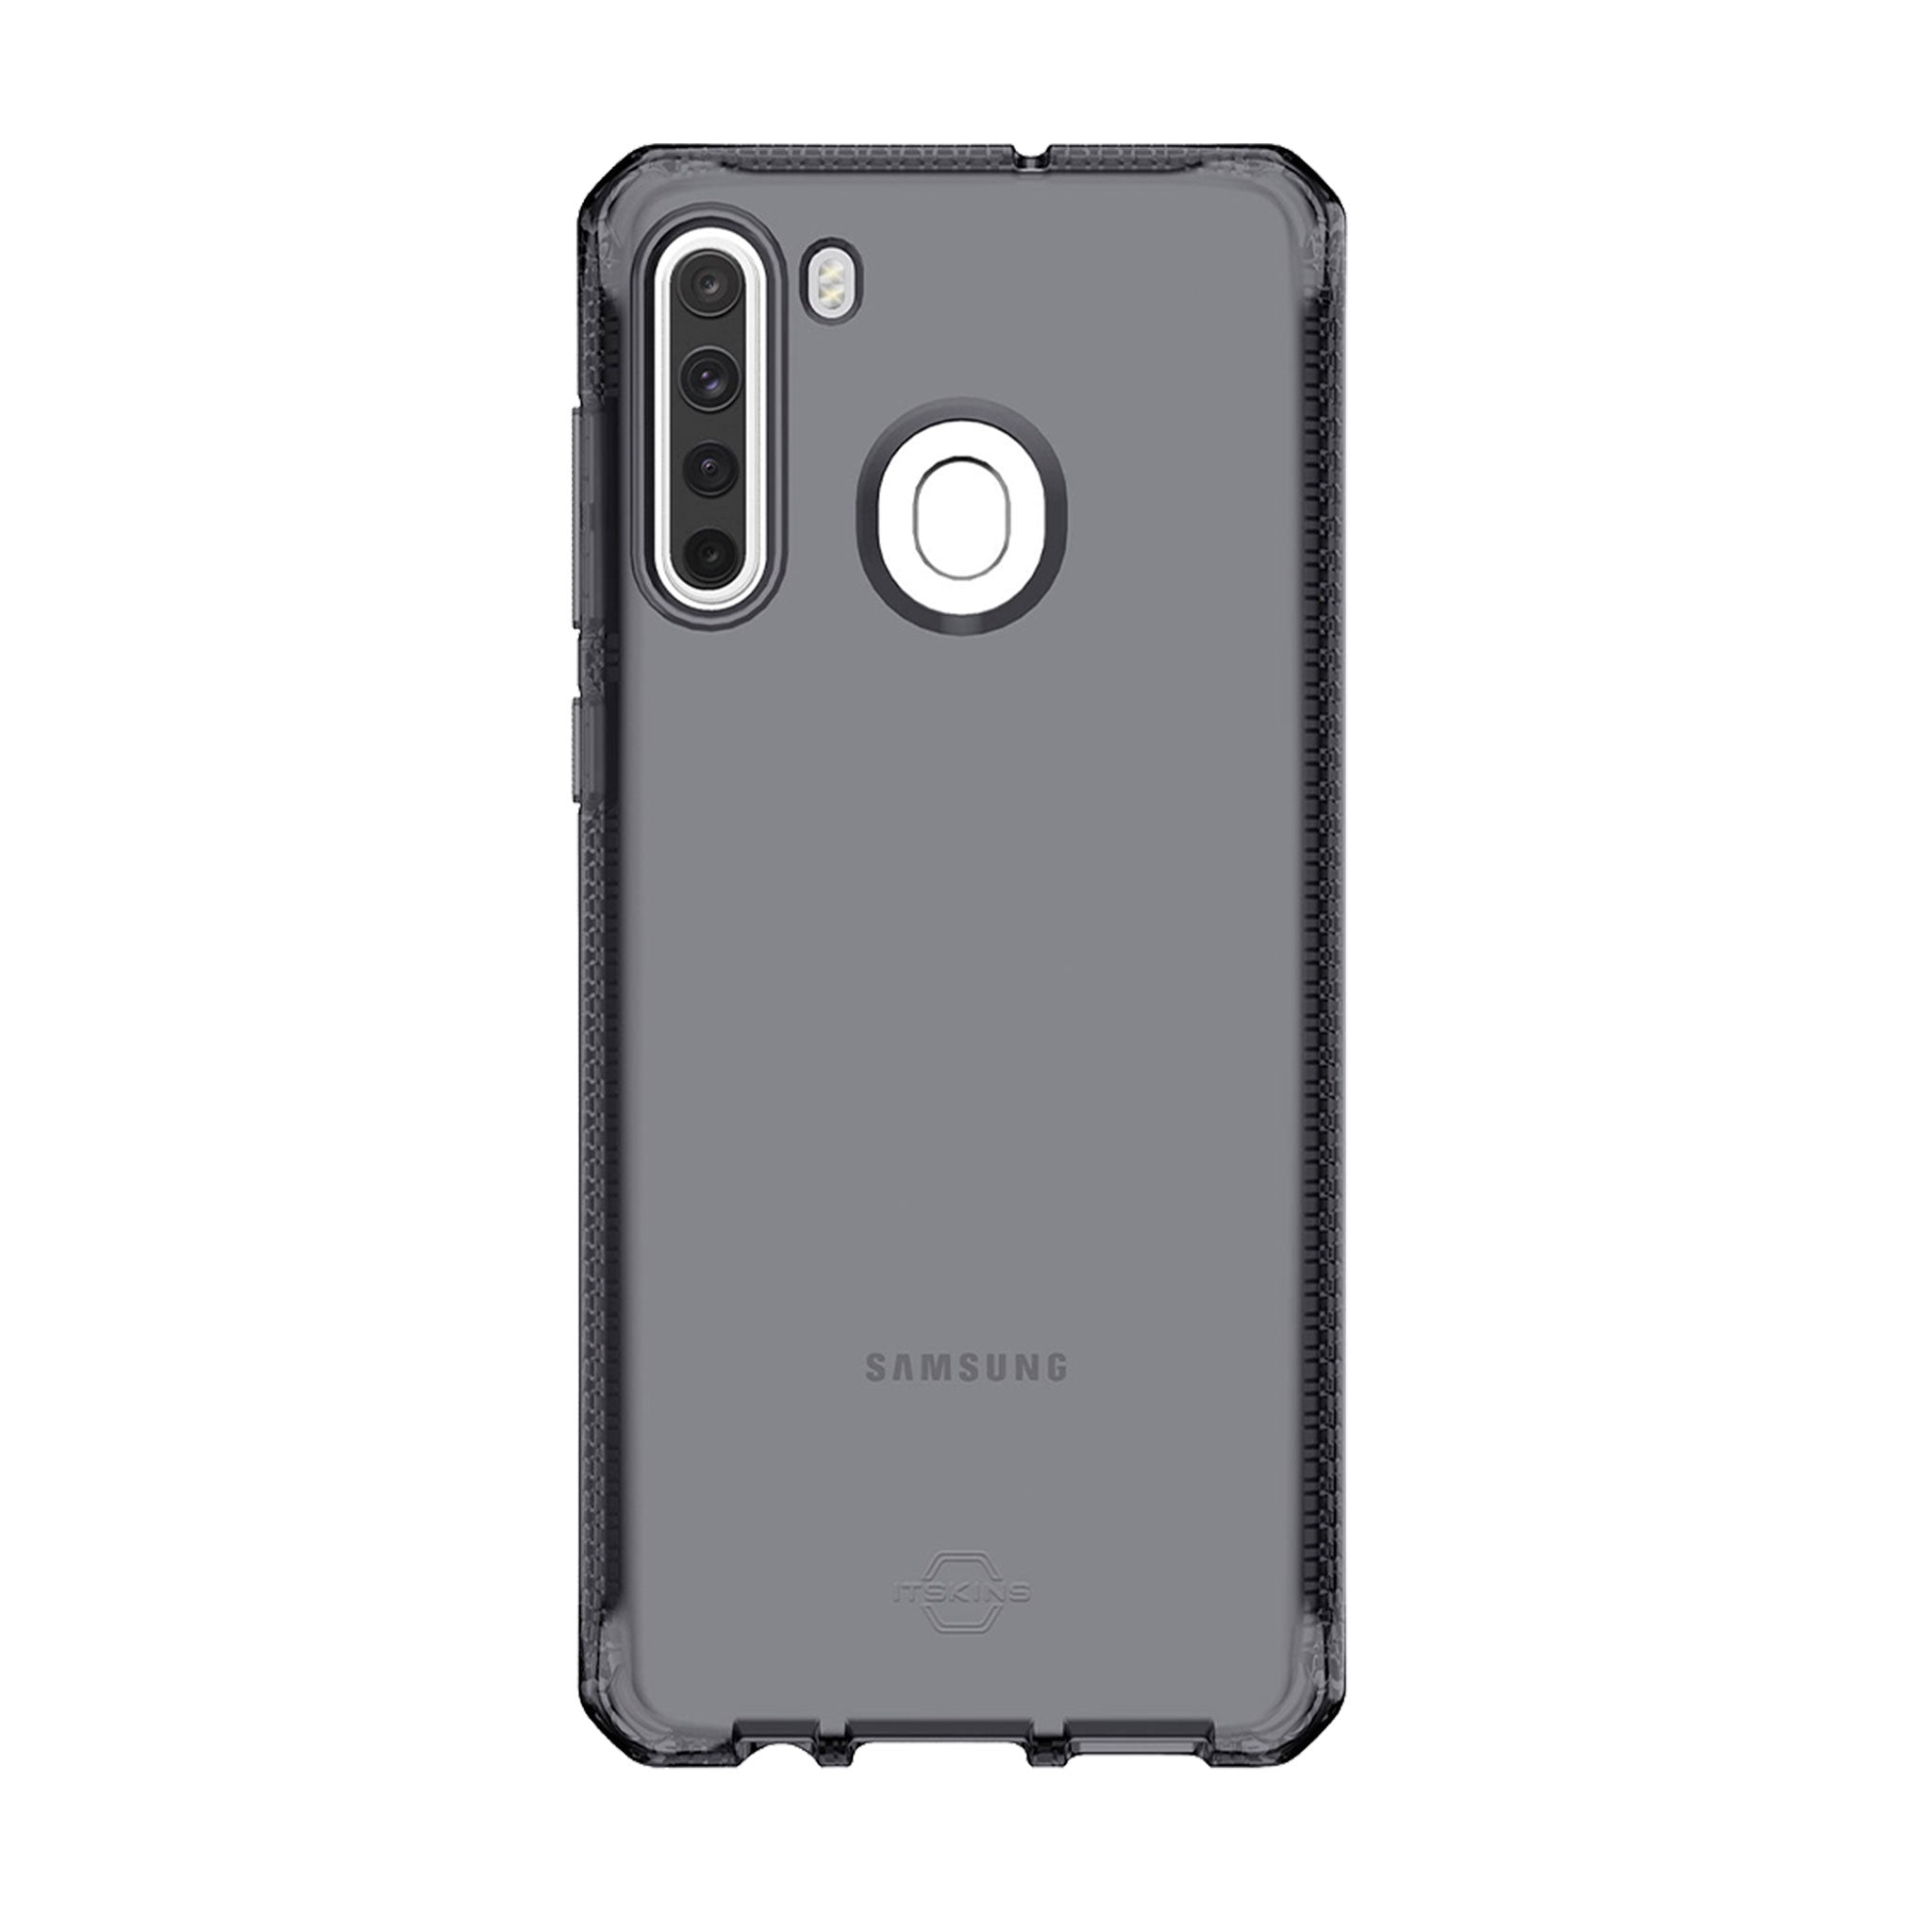 Itskins - Spectrum Clear Case For Samsung Galaxy A21 - Smoke